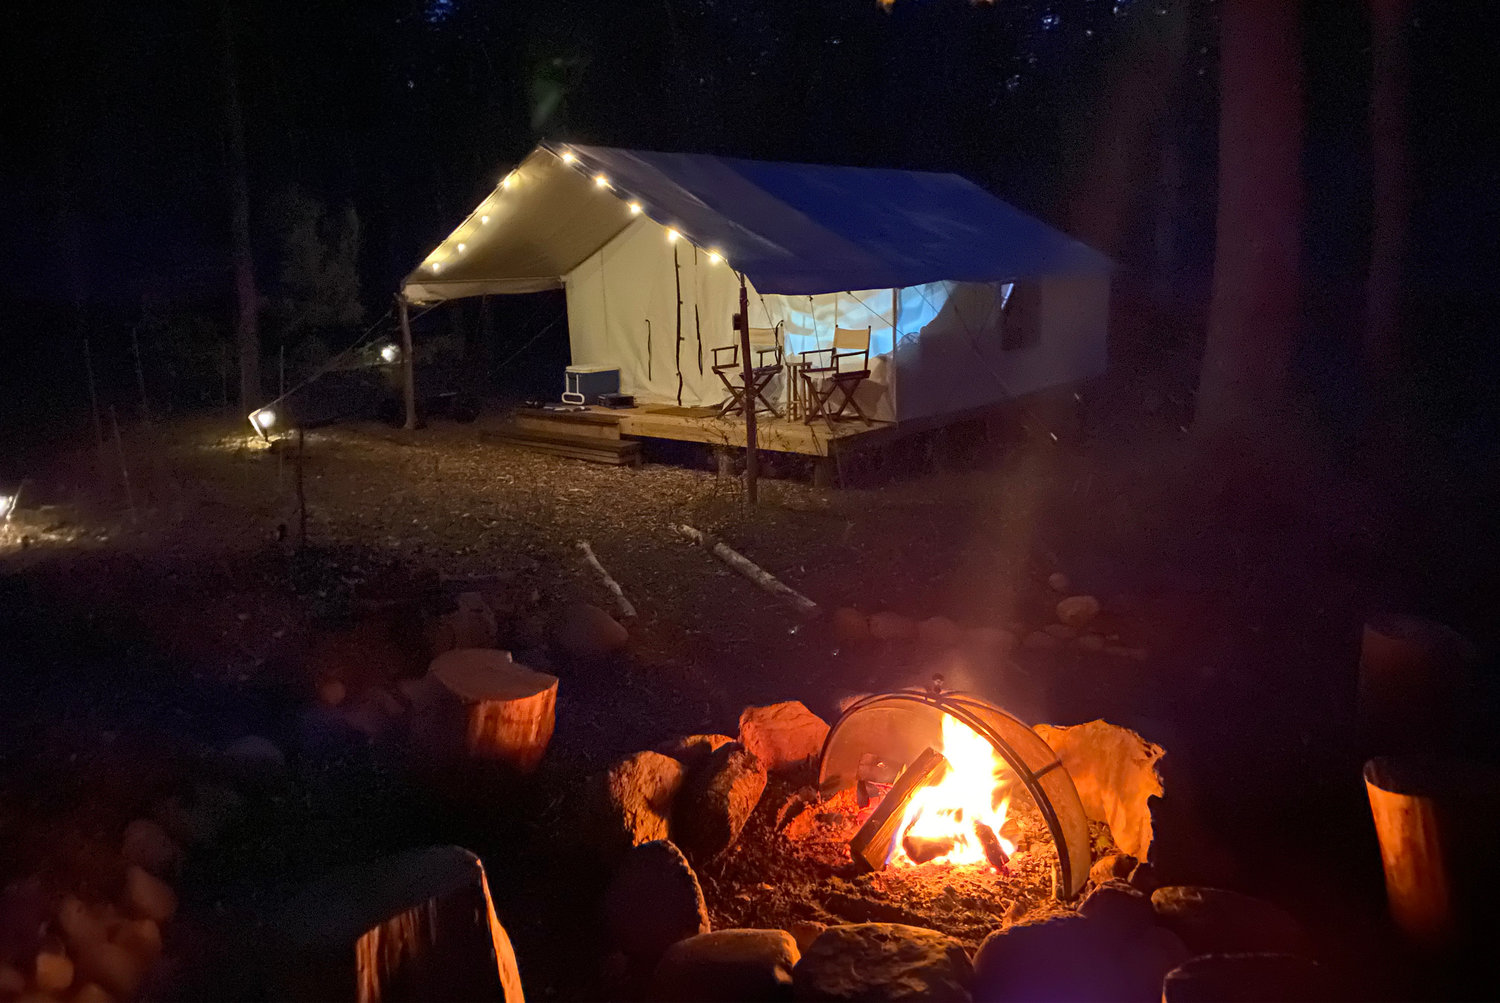 GLAMPERS TAKE NOTE: Pack for warm days and comfy nights – perfect for adventuring followed by evenings by the fire – with firewood provided. Summer temps in Coventry typically range from 64°F to 81°F. Source: WeatherSpark.com